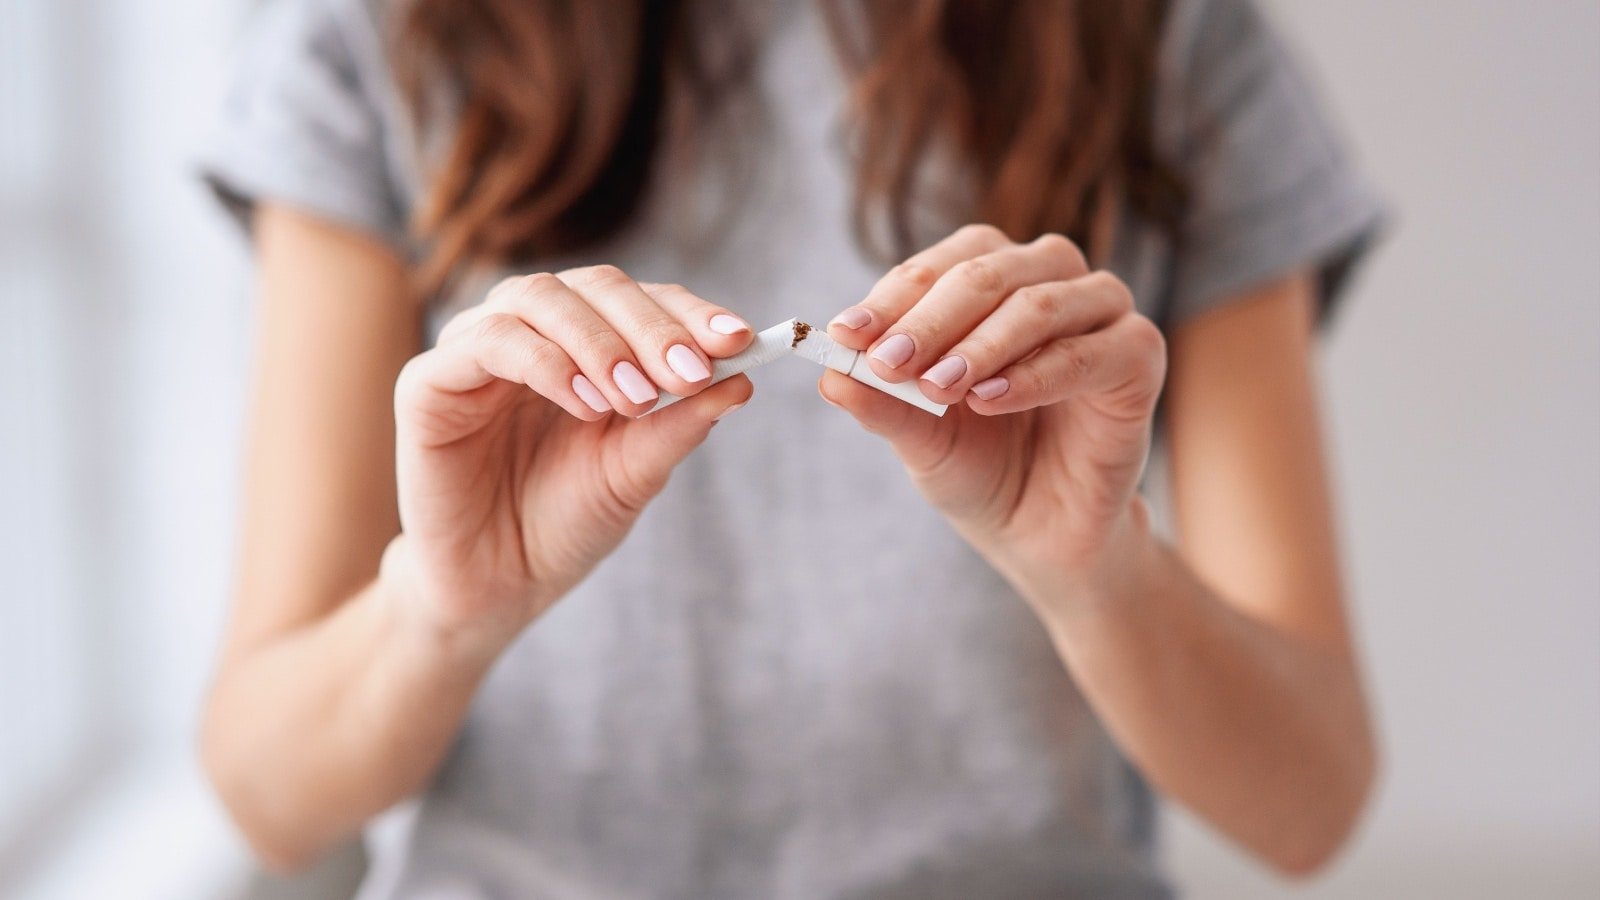 <p>Smoking worsens snoring due to nightly nicotine withdrawal and increased swelling in the upper airway. Even exposure to secondhand smoke can increase snoring.</p>